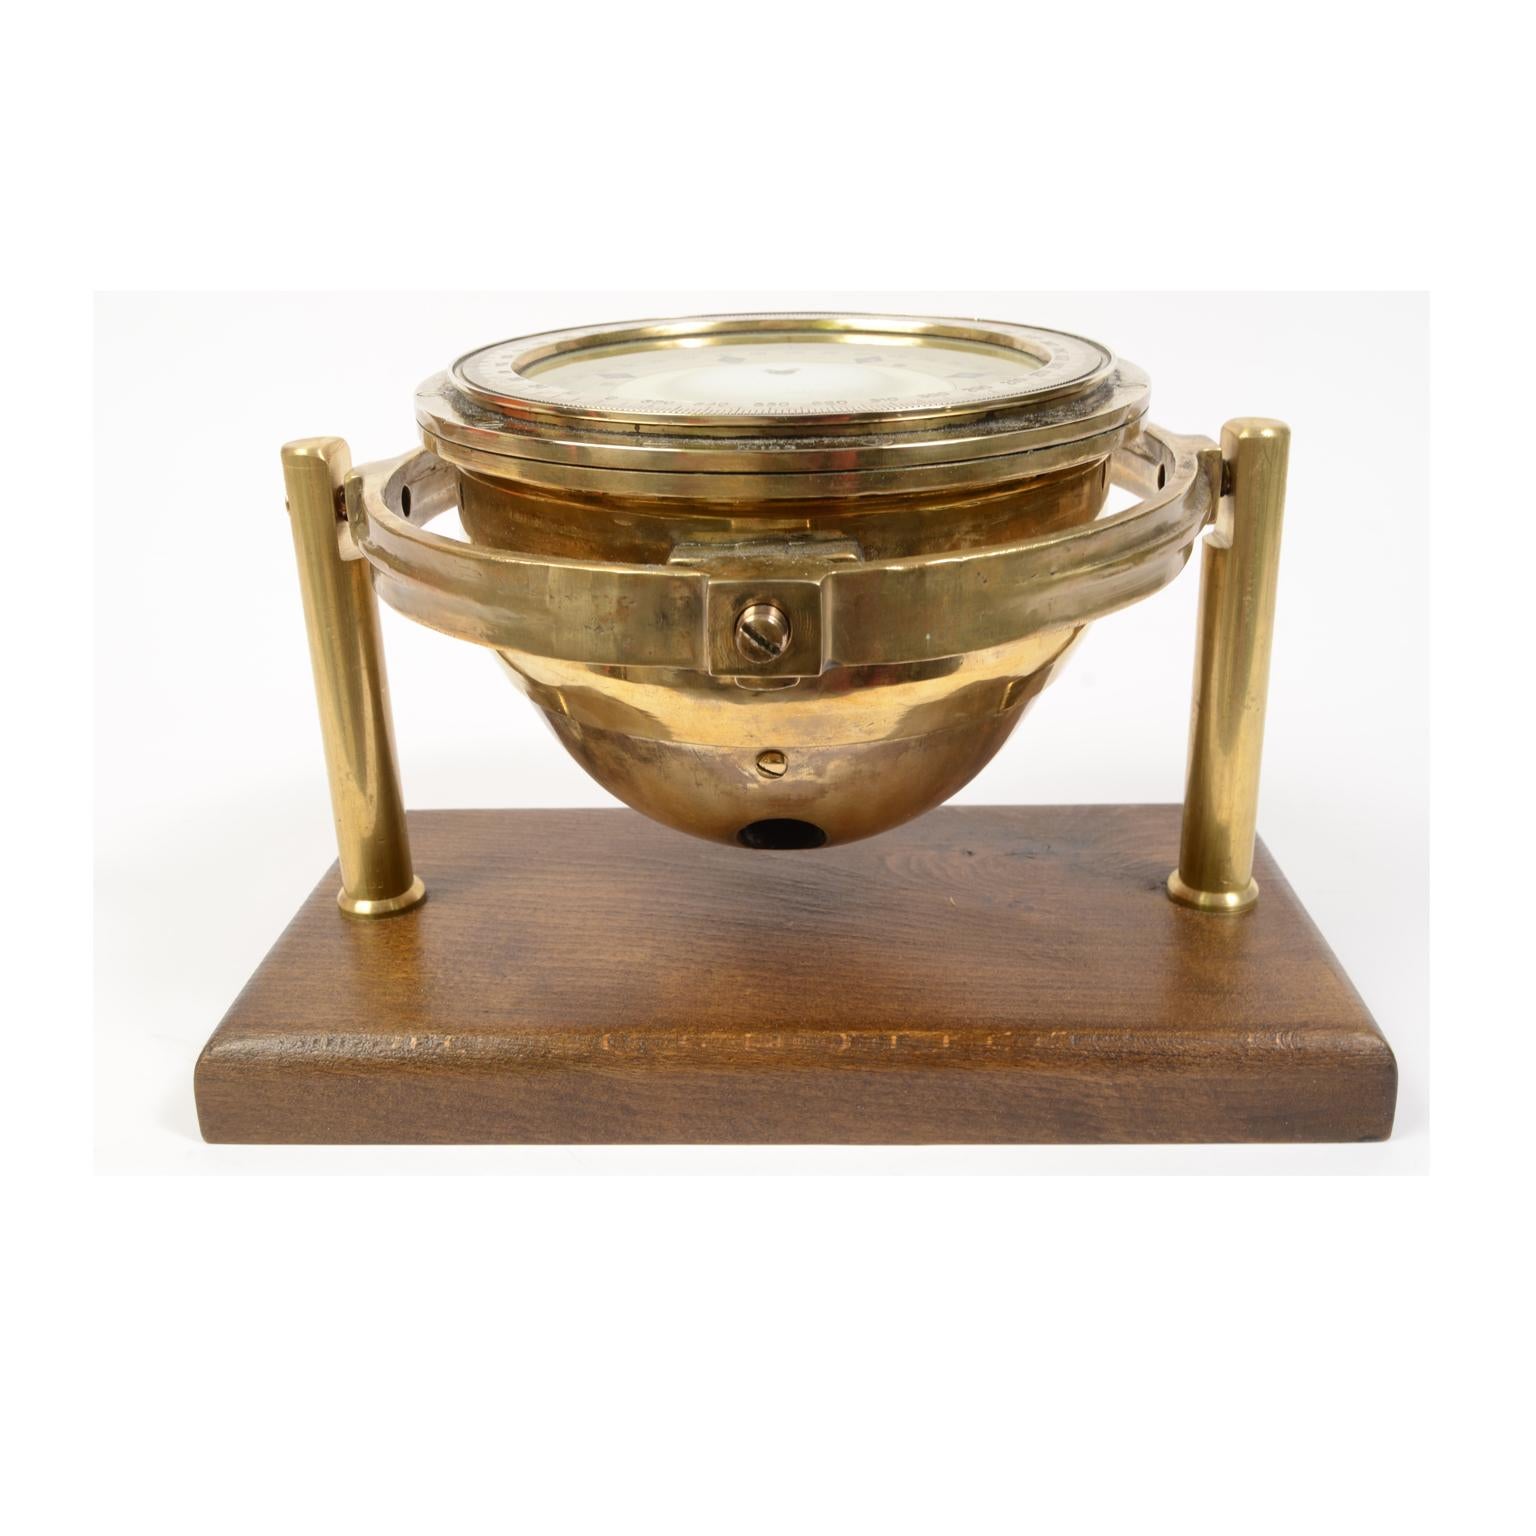 Liquid nautical compass of brass and glass made in the early 1900s, mounted on a universal joint and mounted on a walnut wood board with custom-made brass supports. Complete with double goniometric circle, both external, of engraved brass, and on